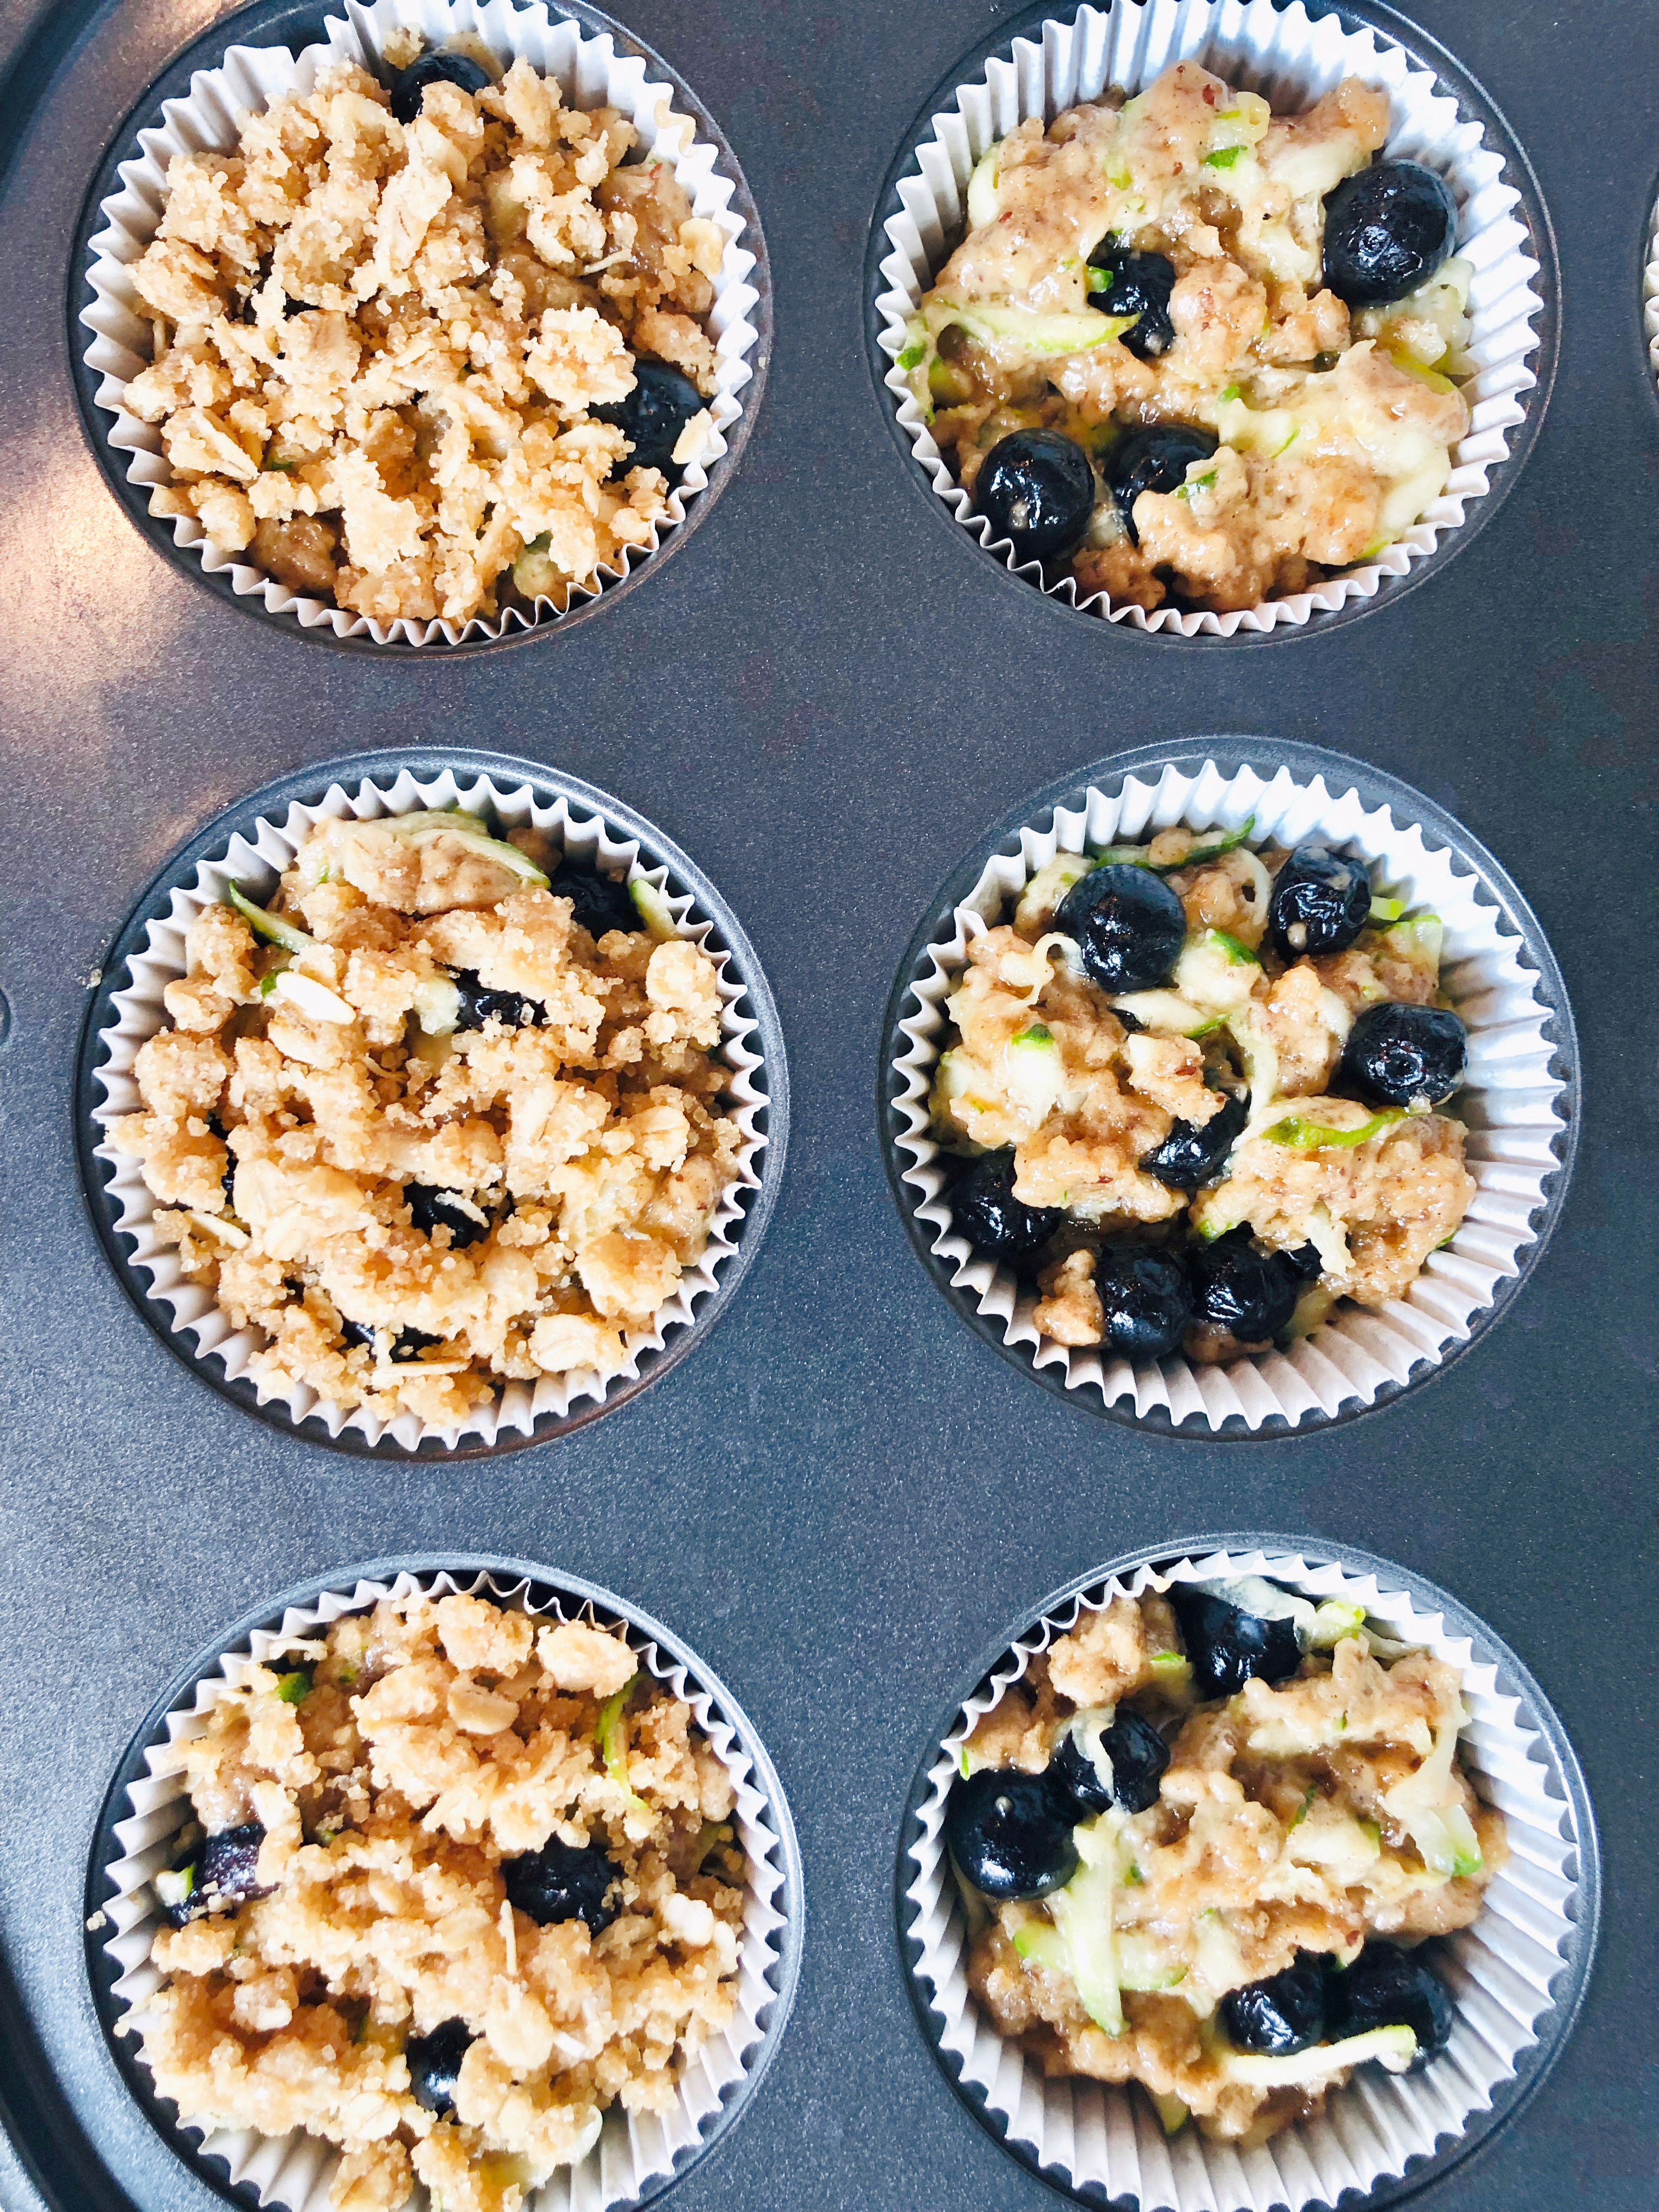 Blueberry and Zucchini Muffins with Streusel Topping - Sweet and savory flavors of the season shine in these quick easy vegan blueberry zucchini muffins that are perfect for breakfast or snacking! via @thiswifecooks